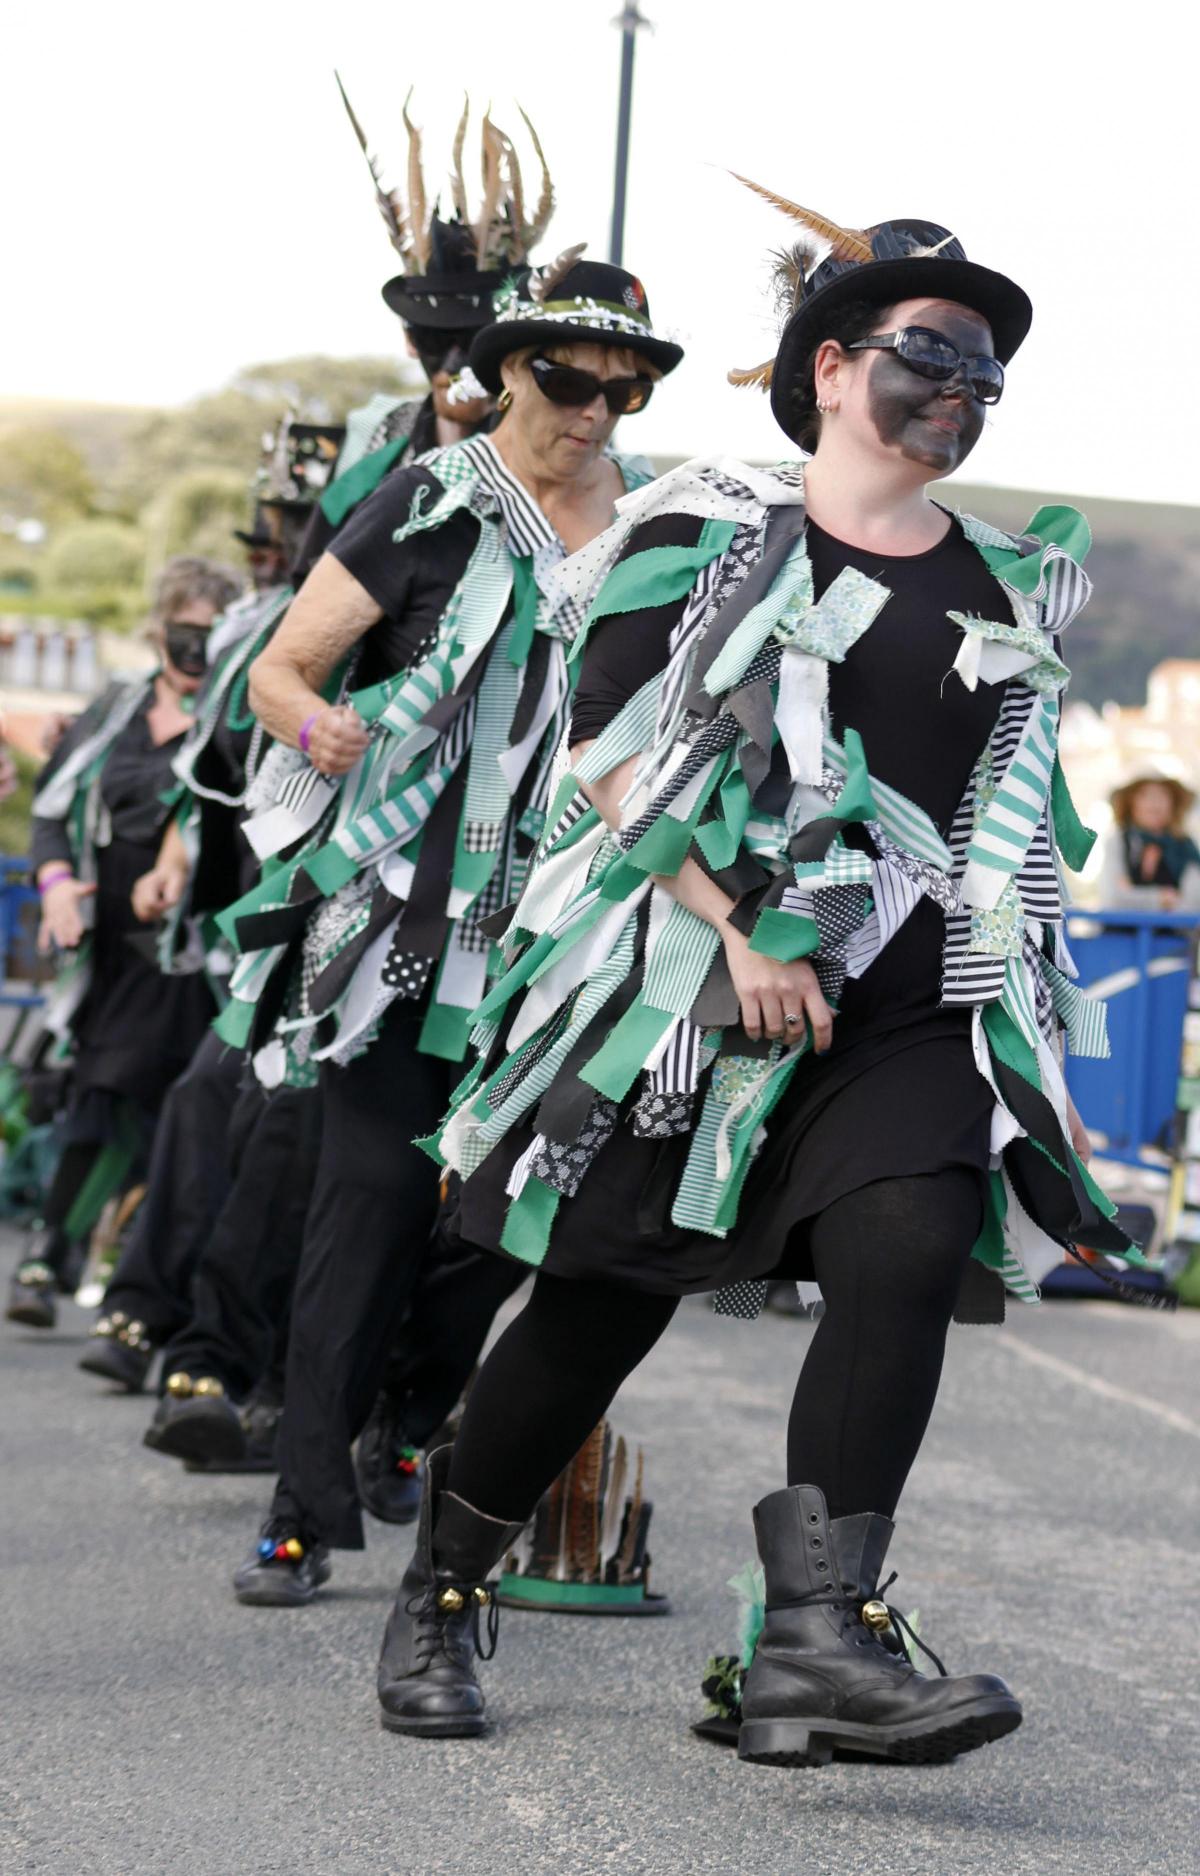 All our pictures of Swanage Folk Festival 2013